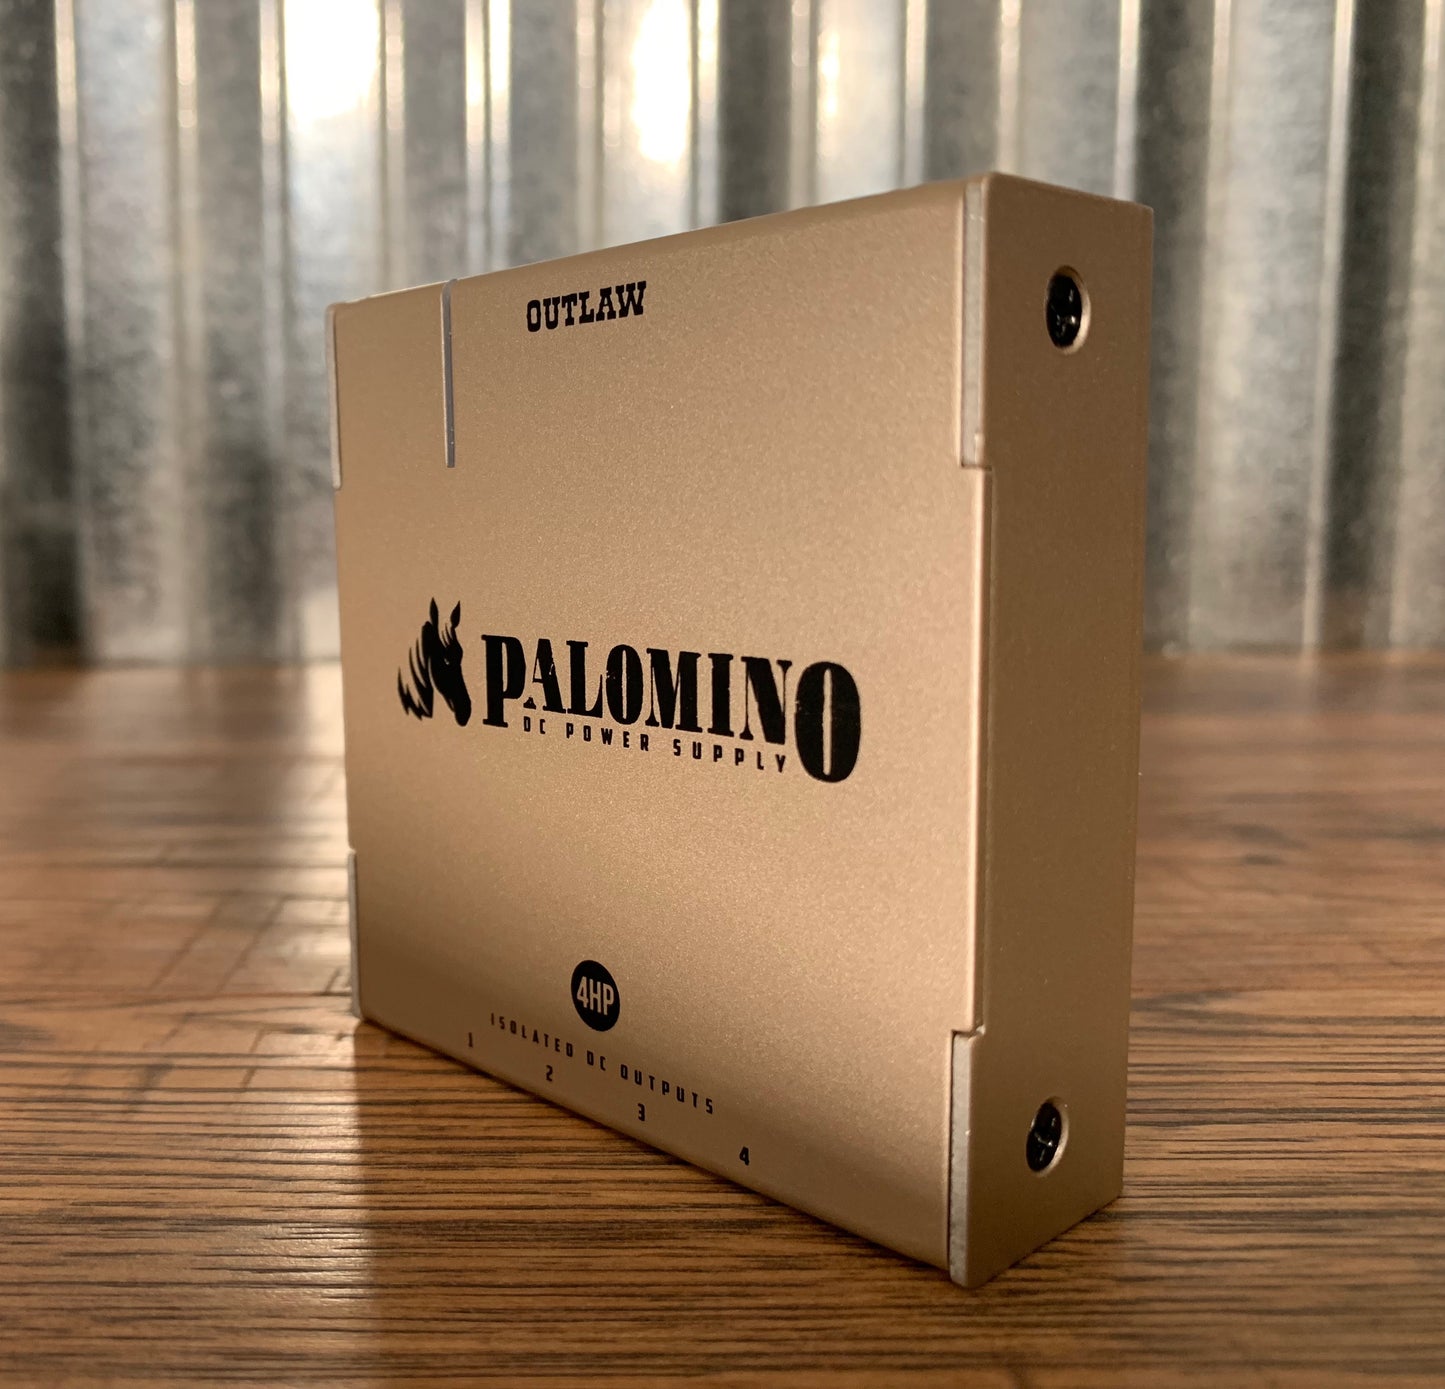 Outlaw Effects Palomino 4HP Isolated Pedalboard Guitar Effect Pedal Power Supply Demo